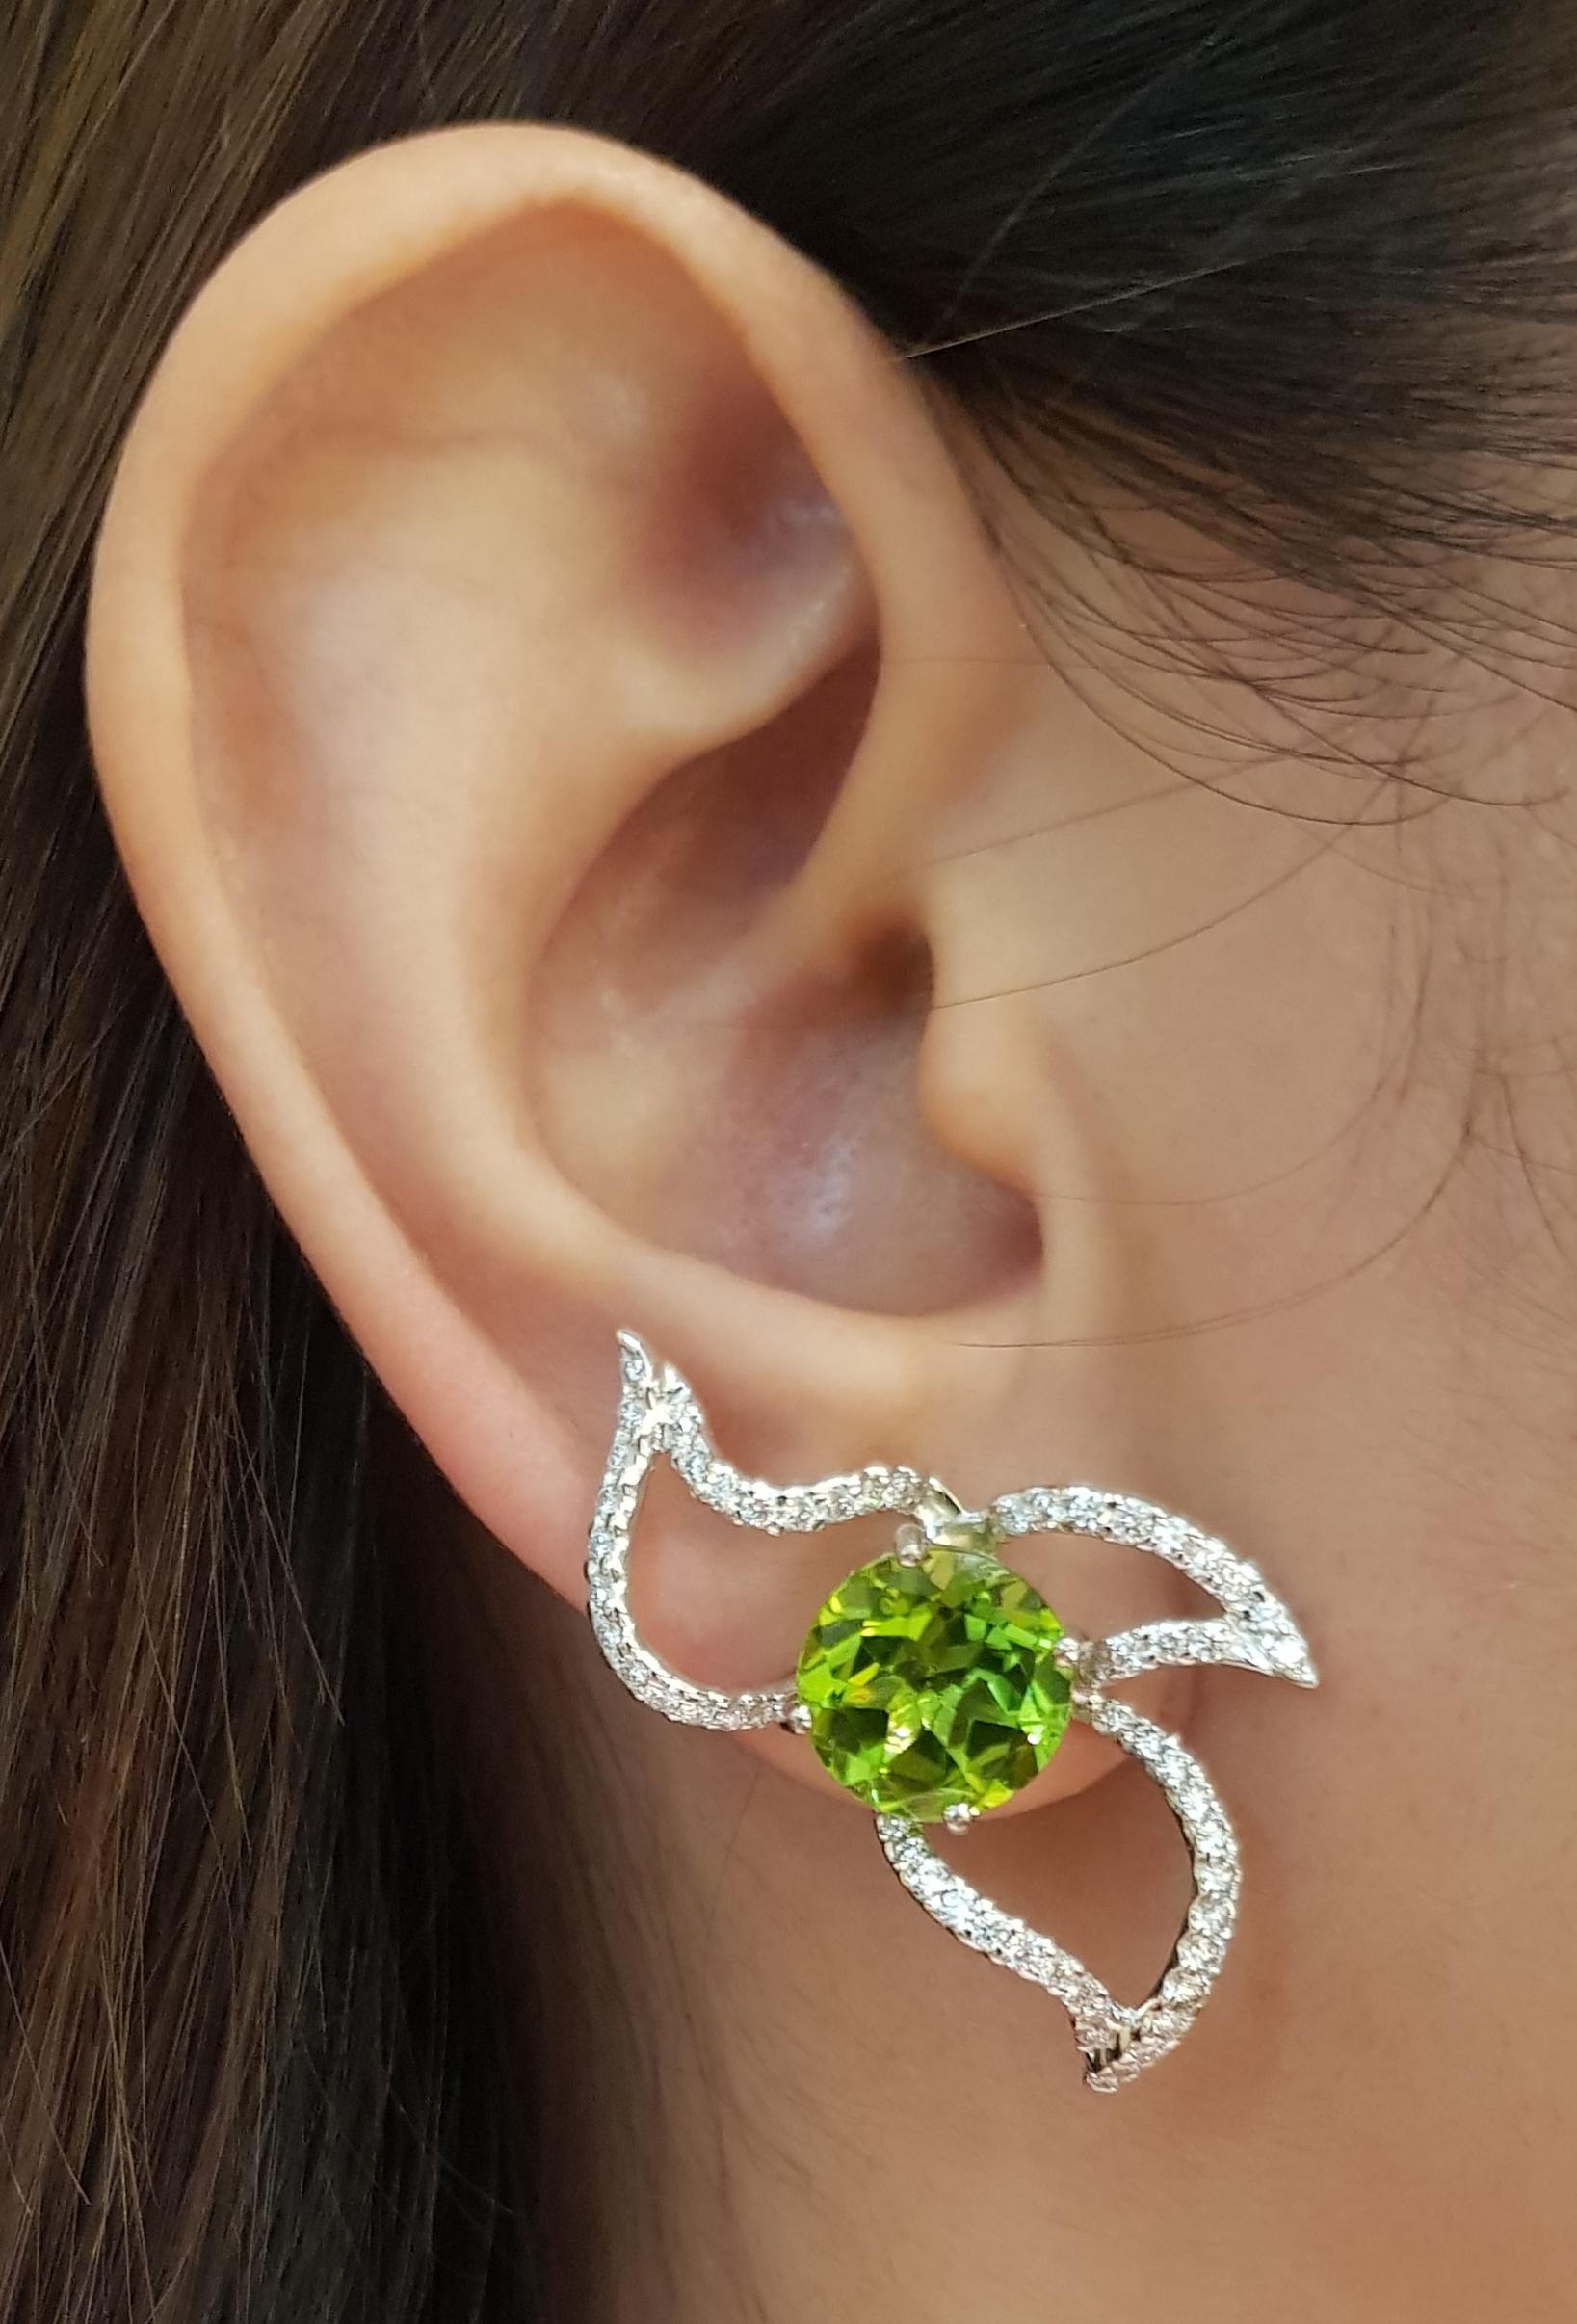 Peridot 8.50 carats with Diamond 1.24 carats Earrings set in 18 Karat White Gold Settings

Width:  2.1 cm 
Length:  3.4 cm
Total Weight: 9.62 grams

